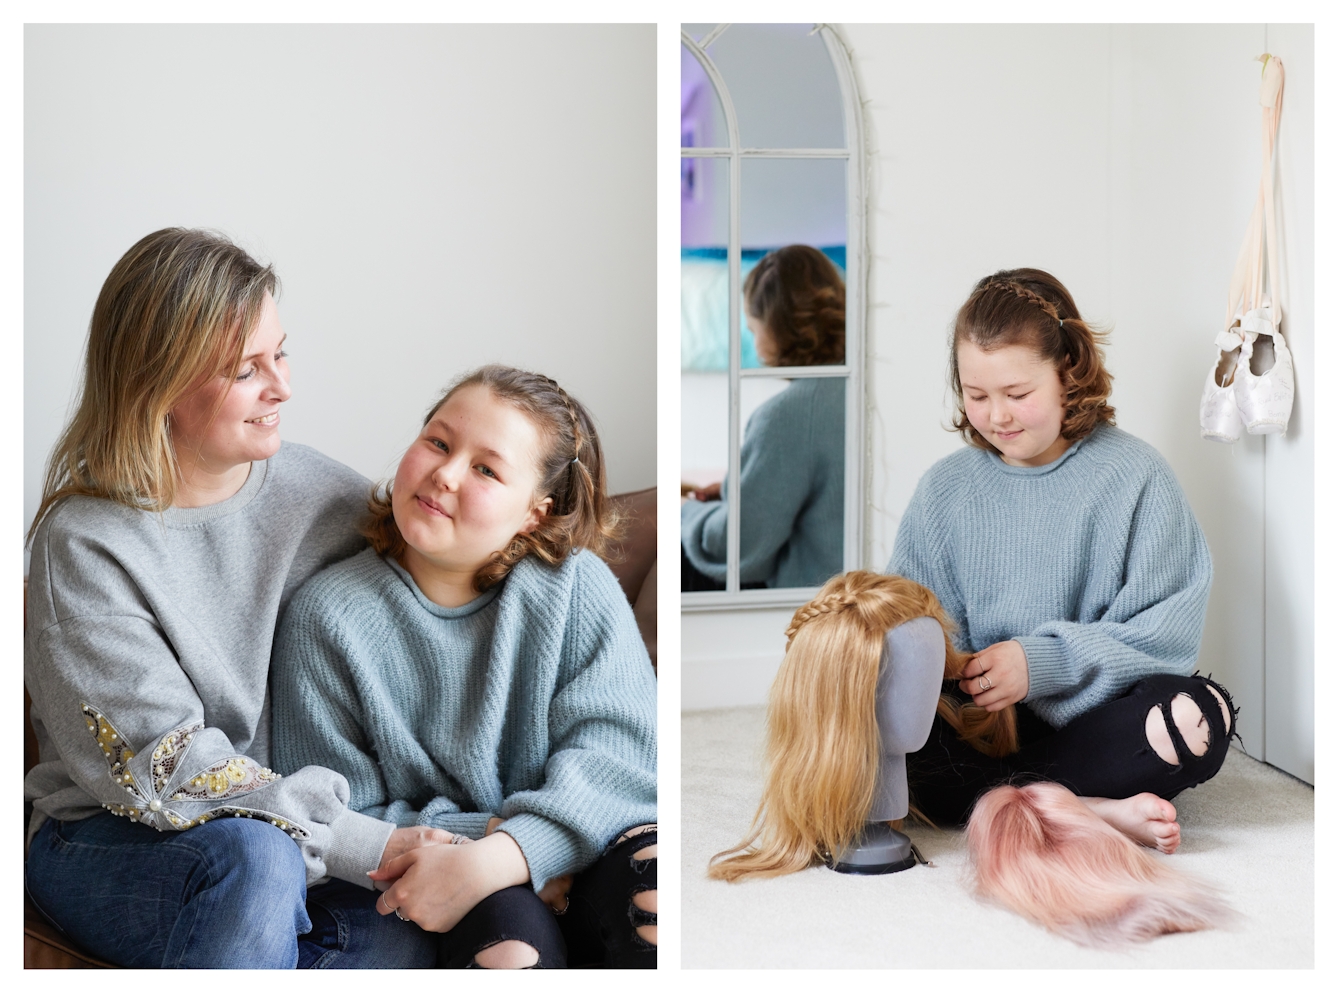 Photographic diptych. The image on the left shows a young girl and her mother sat on a sofa in an embrace and holding hands. The young girl is looking to camera with a quiet smile on her face. Her mother is also smiling looking down towards her daughter. The image on the right shows the same young girl siting on the floor of her bedroom, cross legged. In front of her on the floor are two wigs. One of them is blonde and is sitting on a mannequin head. The other is a light pink colour and is lying on the floor. The girl is in the process of caring for the blonds wig with strands of hair in her hands and she's looking down towards in with a slight smile on her face. Behind her is am arched mirror on the wall and a pair of ballet shoes hanging from a door handle.